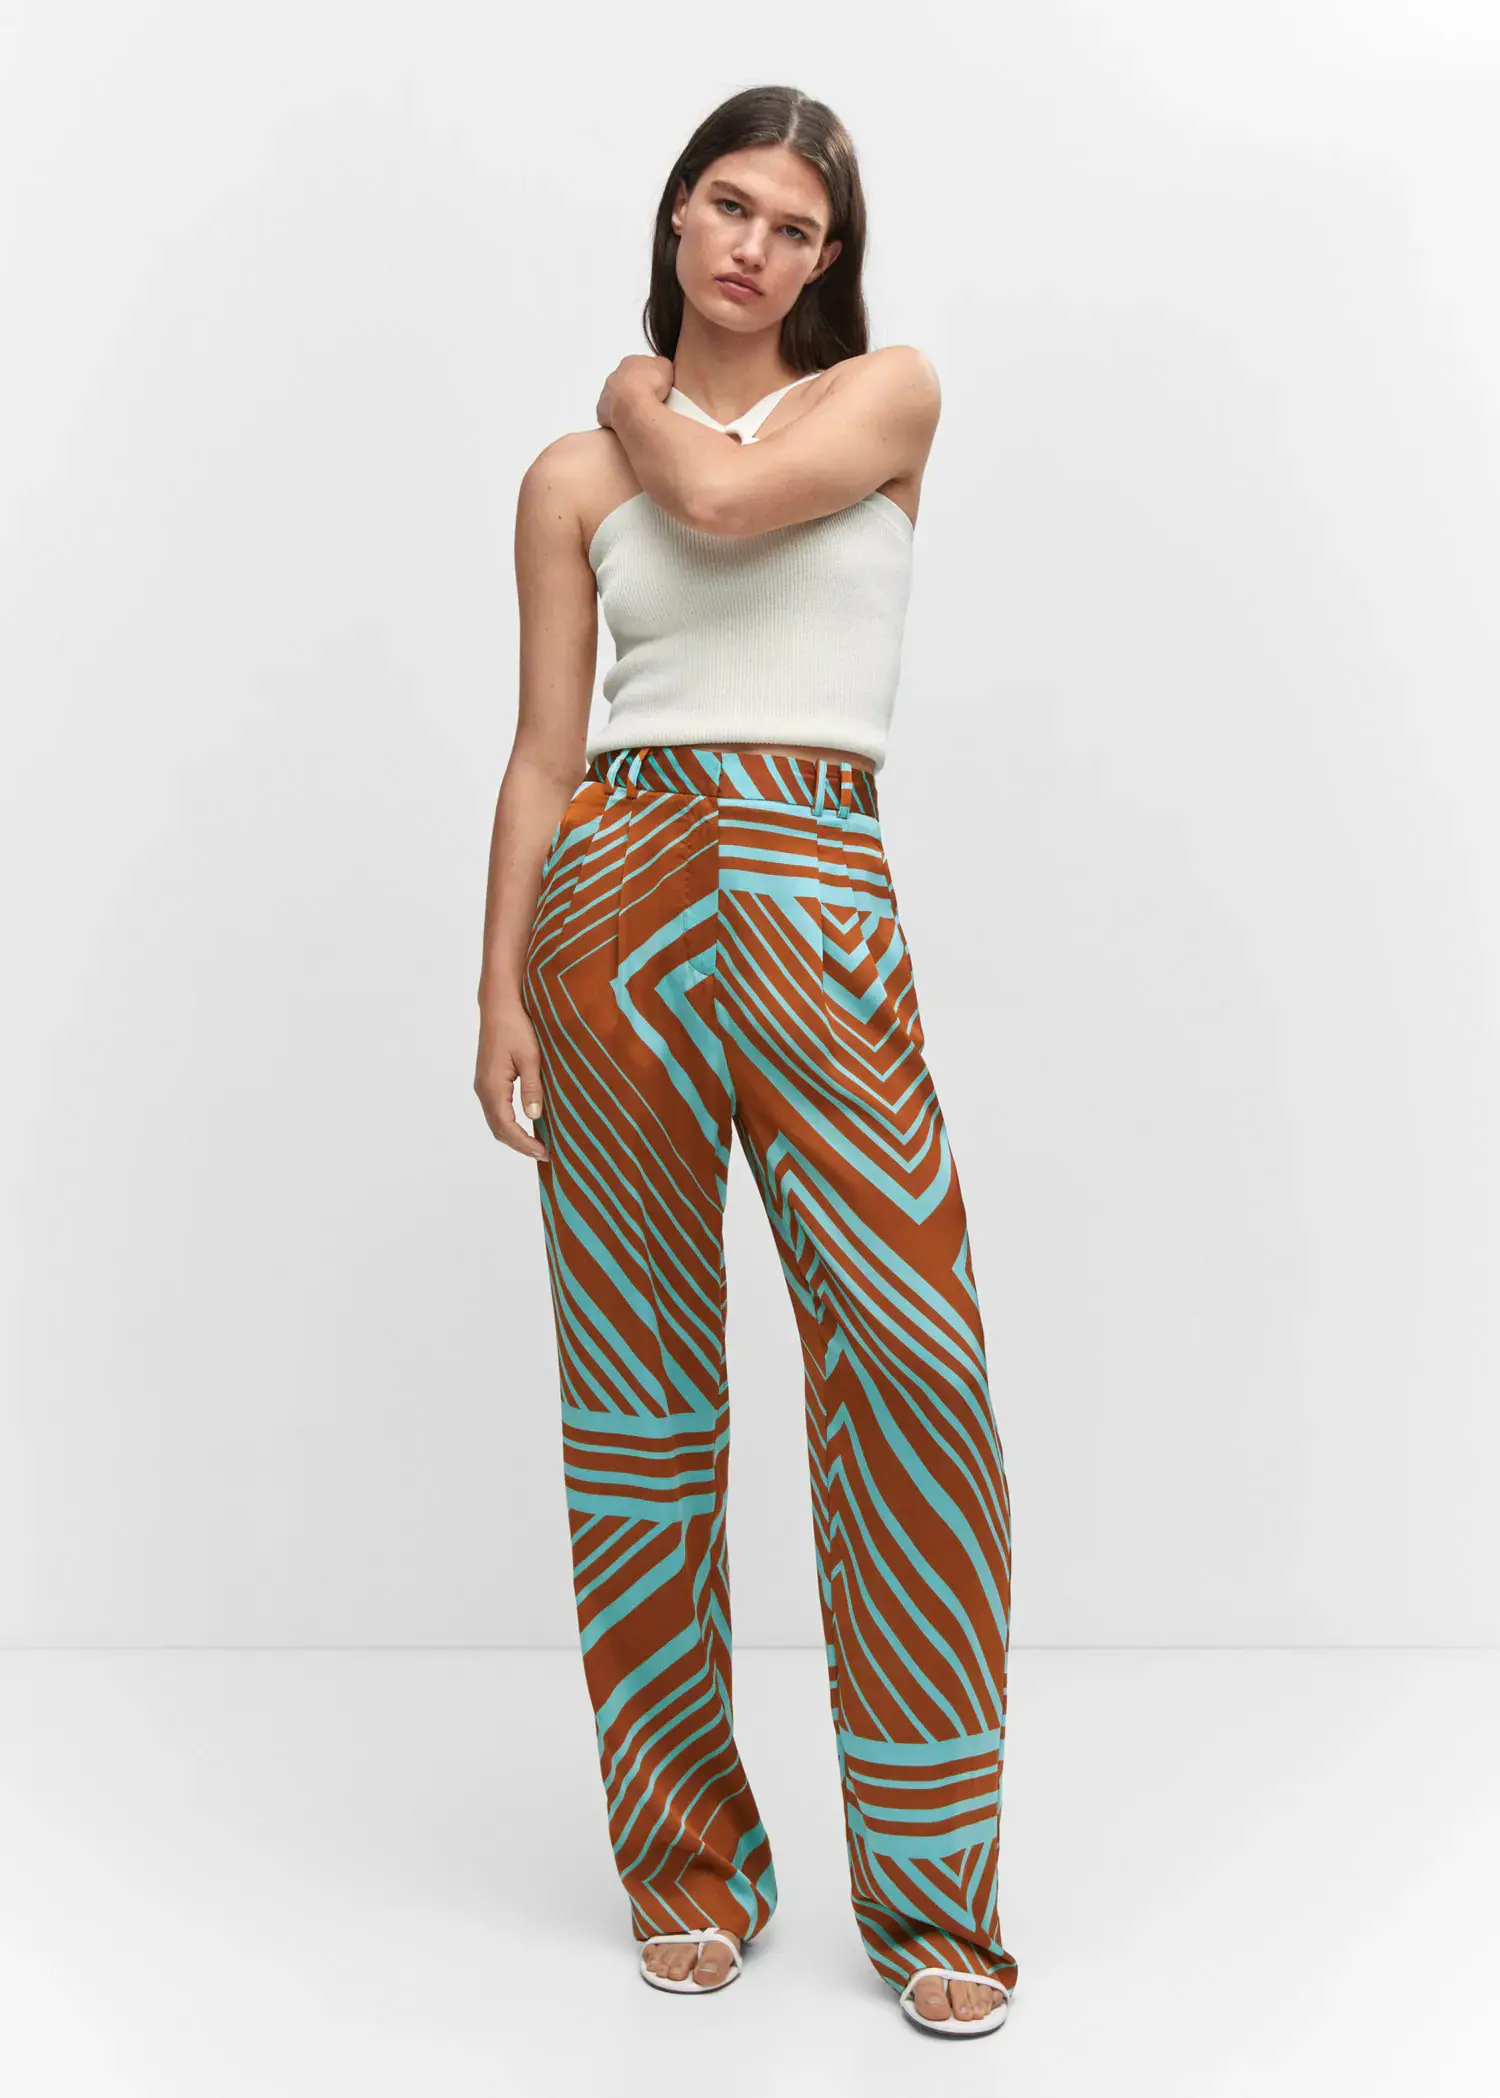 Mango Satin printed trousers. a woman in a white top and brown and blue patterned pants. 